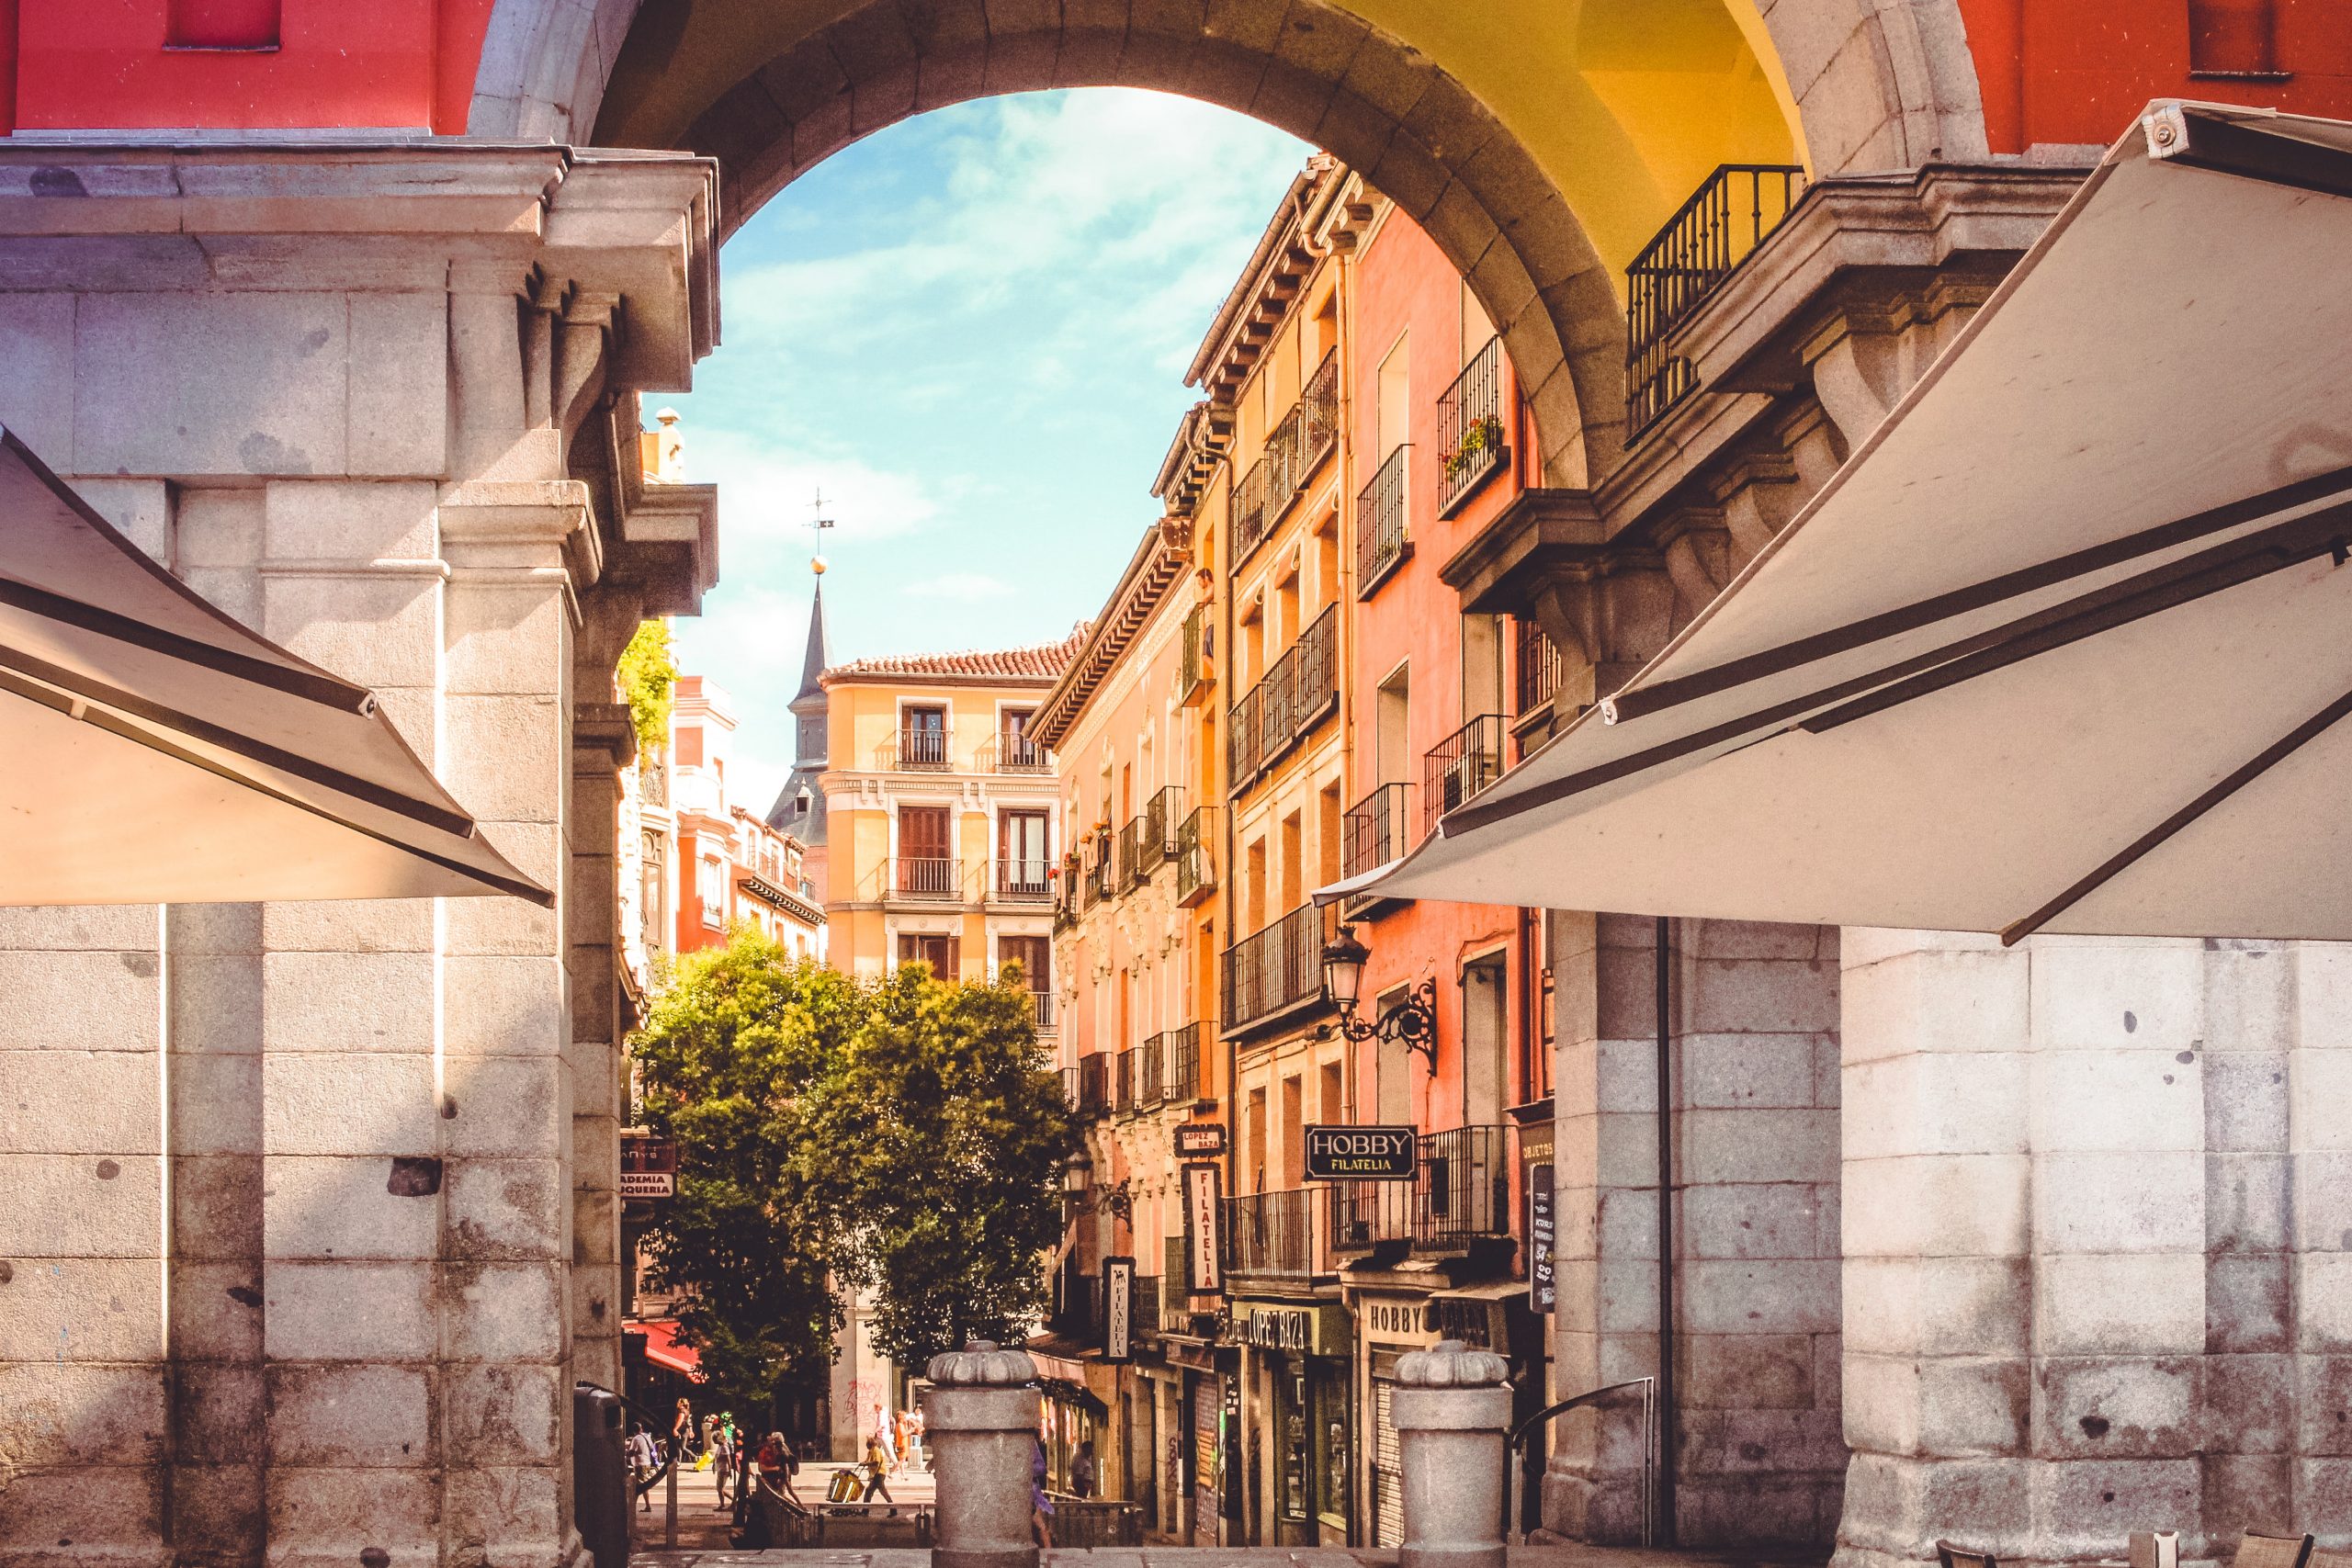 Stay in colourful Salamanca Madrid for luxury hotels and upscale shopping